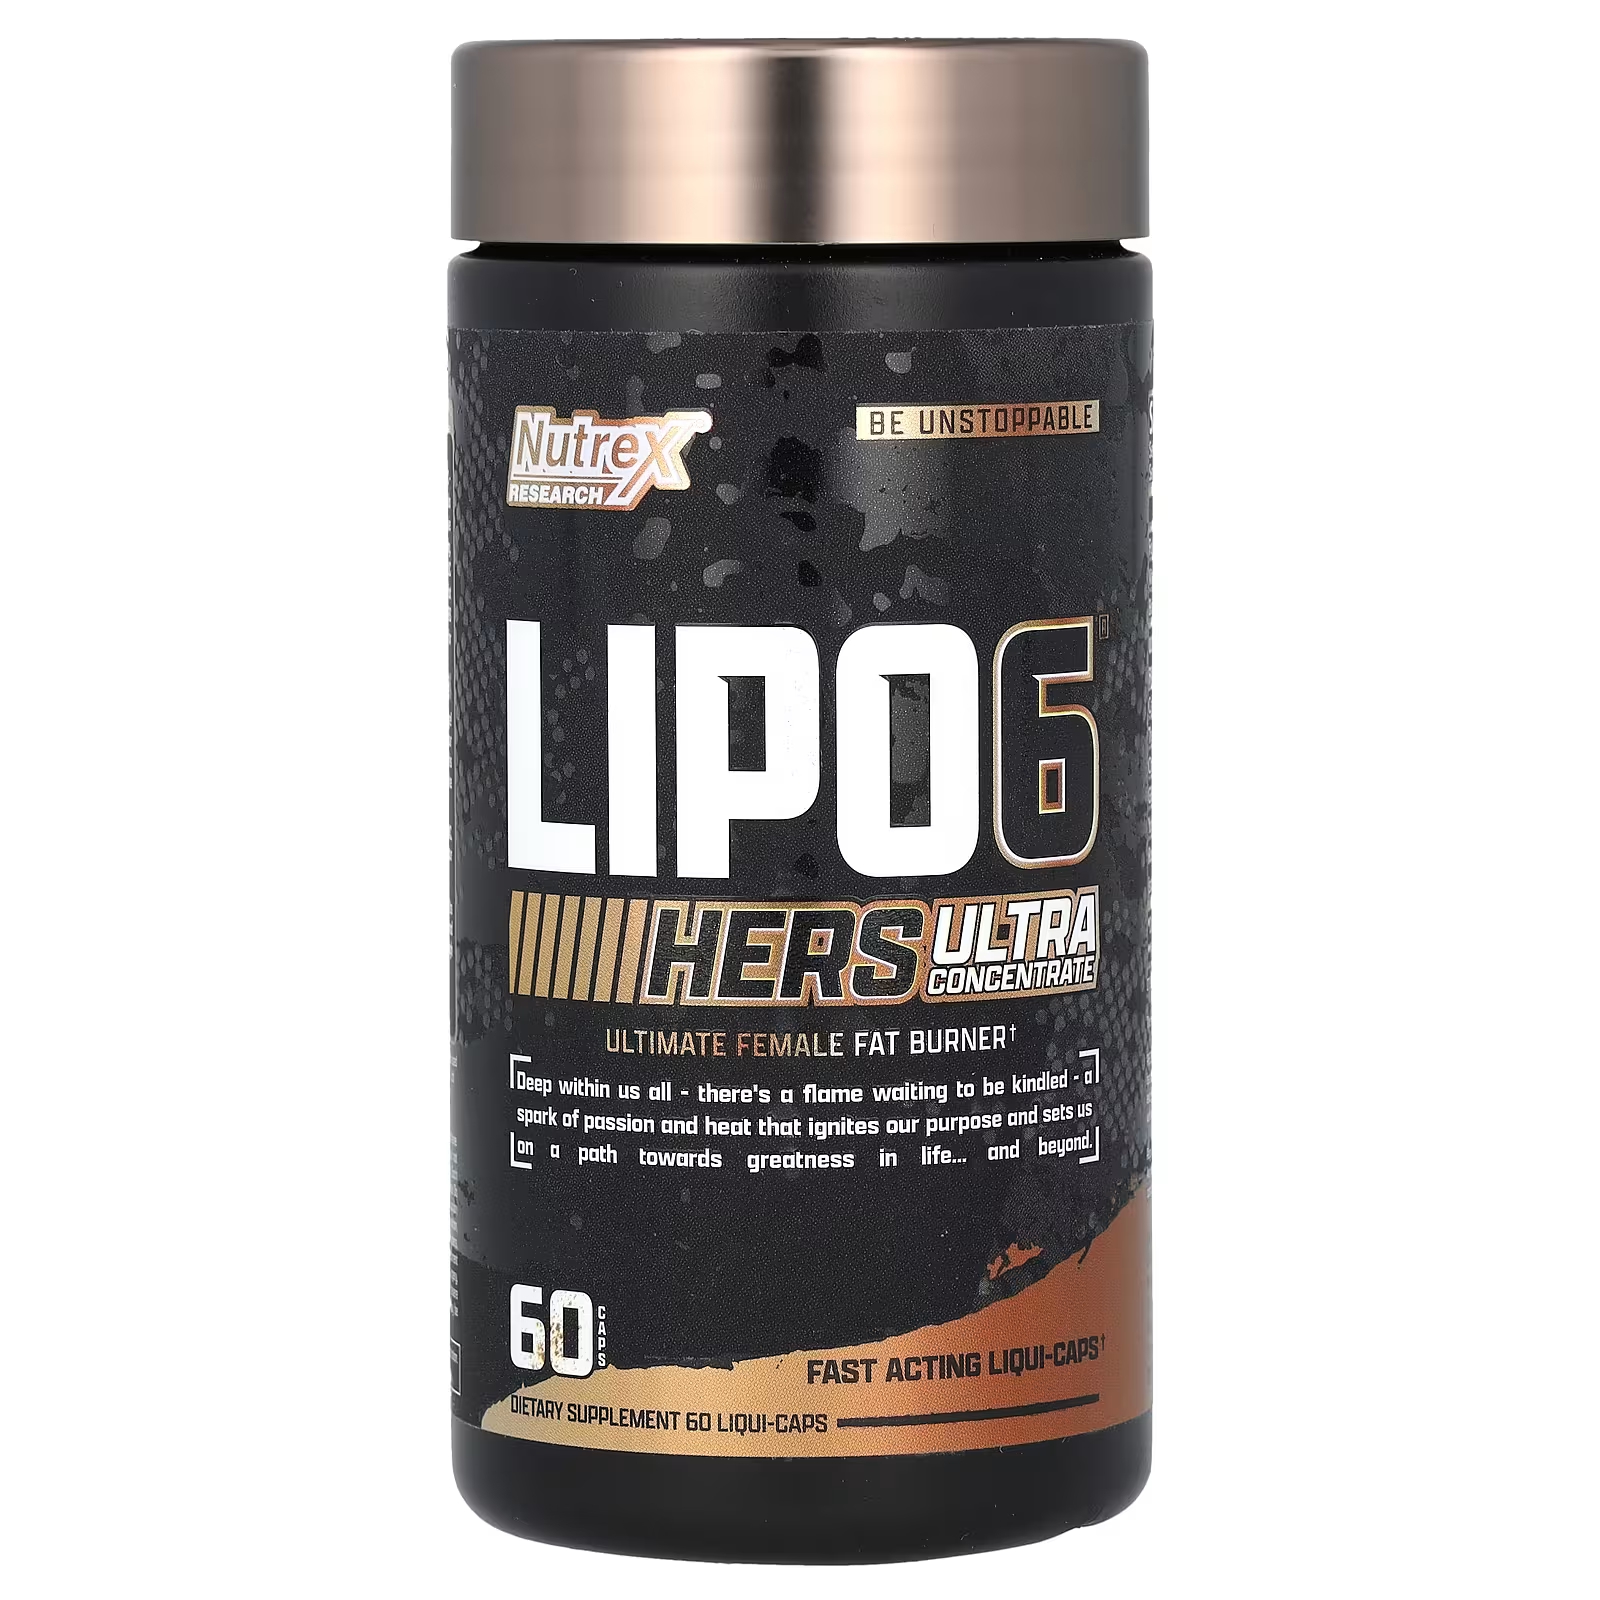 Nutrex Research LIPO 6 Hers Ultra Concentrate, 60 жидких капсул nutrex lipo 6 black ultra concentrate fat destroyer 60 capsules